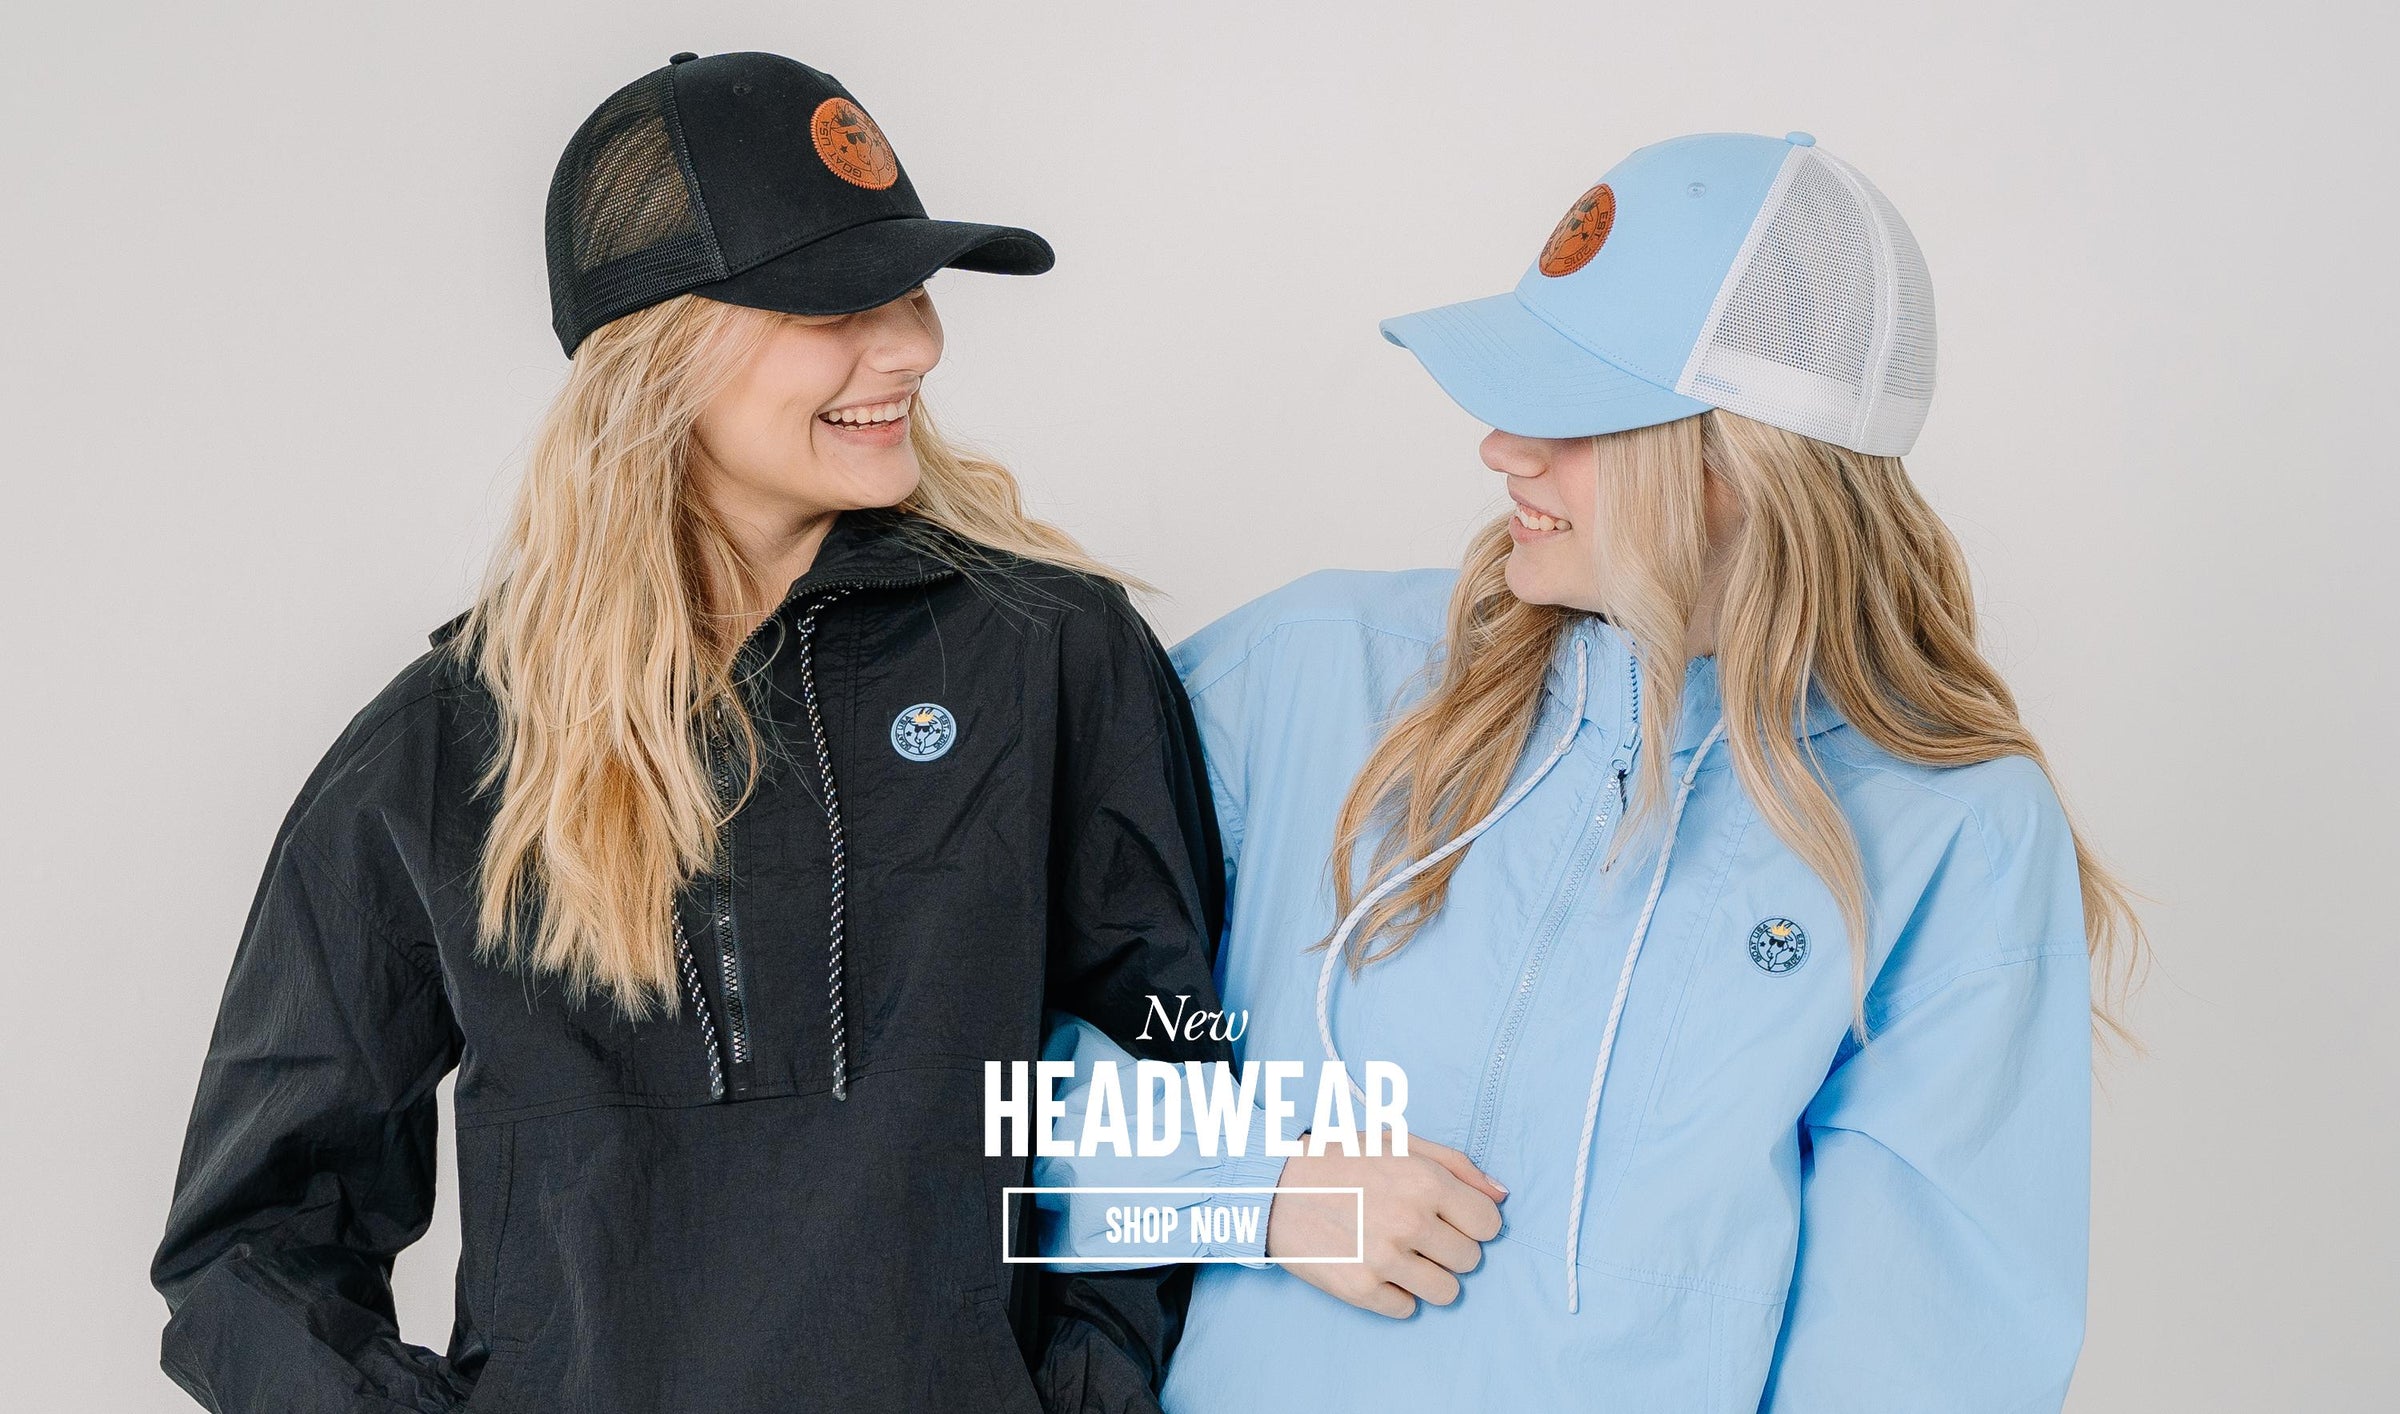 A collection of overlayed images of girls and a boy in various headwear with text that reads "New Headwear Shop Now" 